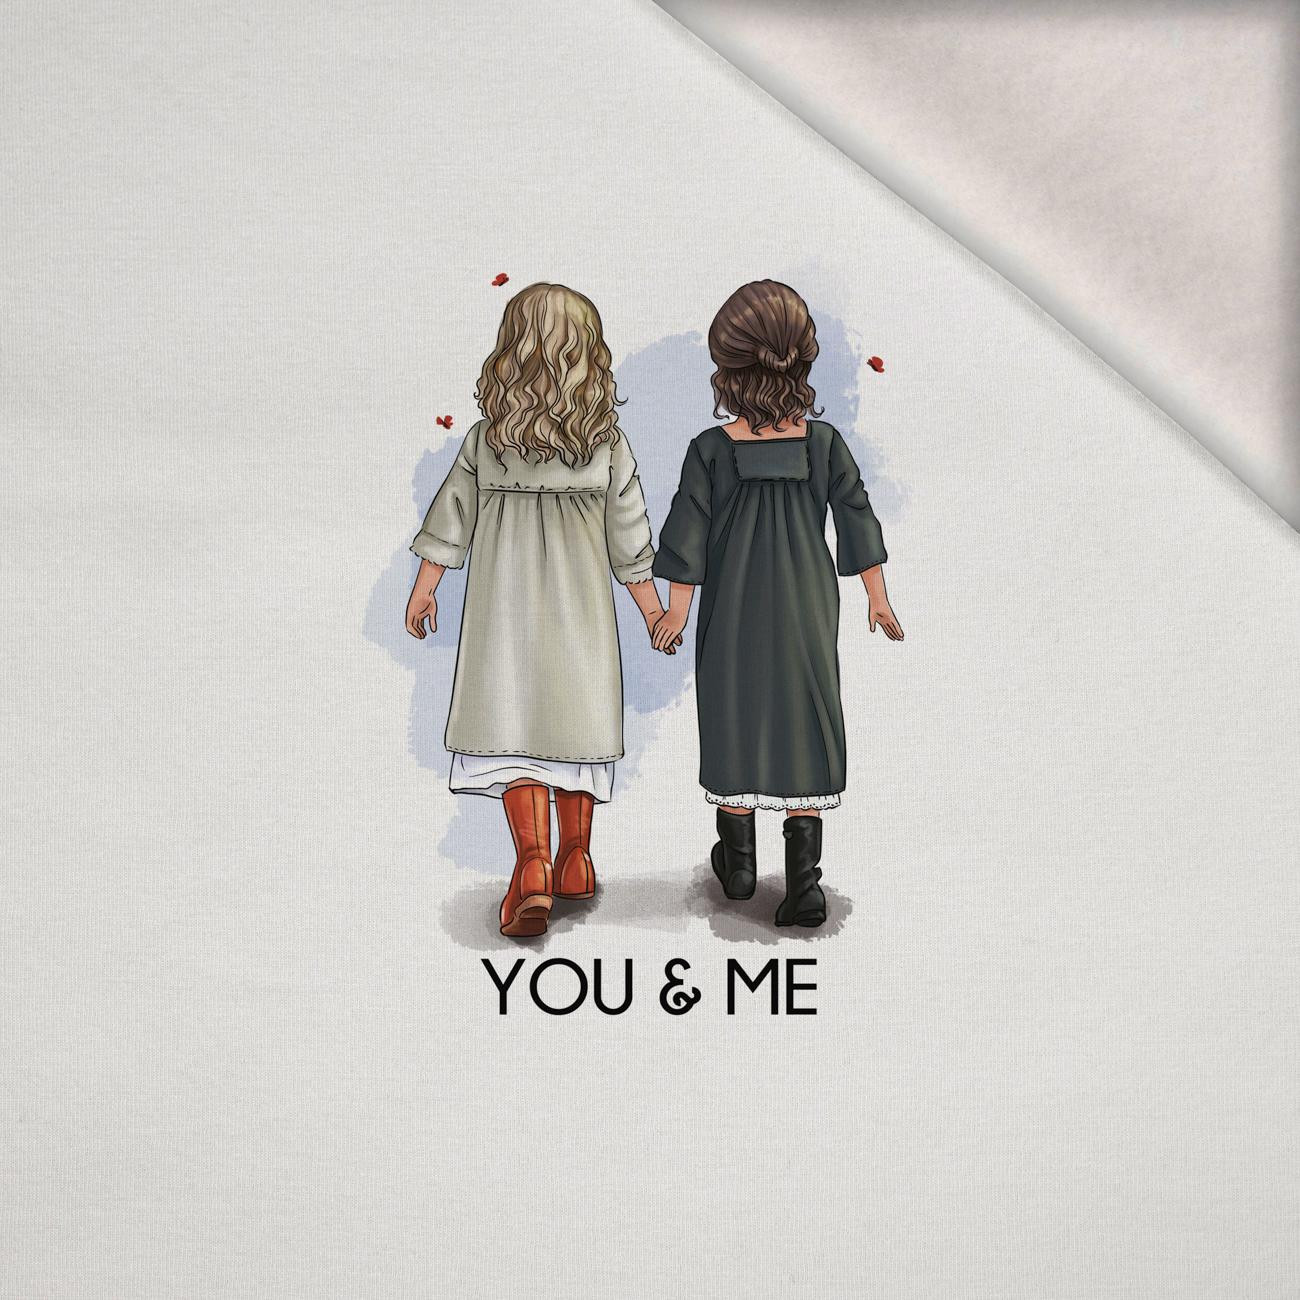 YOU & ME / girls -  PANEL (60cm x 50cm) brushed knitwear with elastane ITY